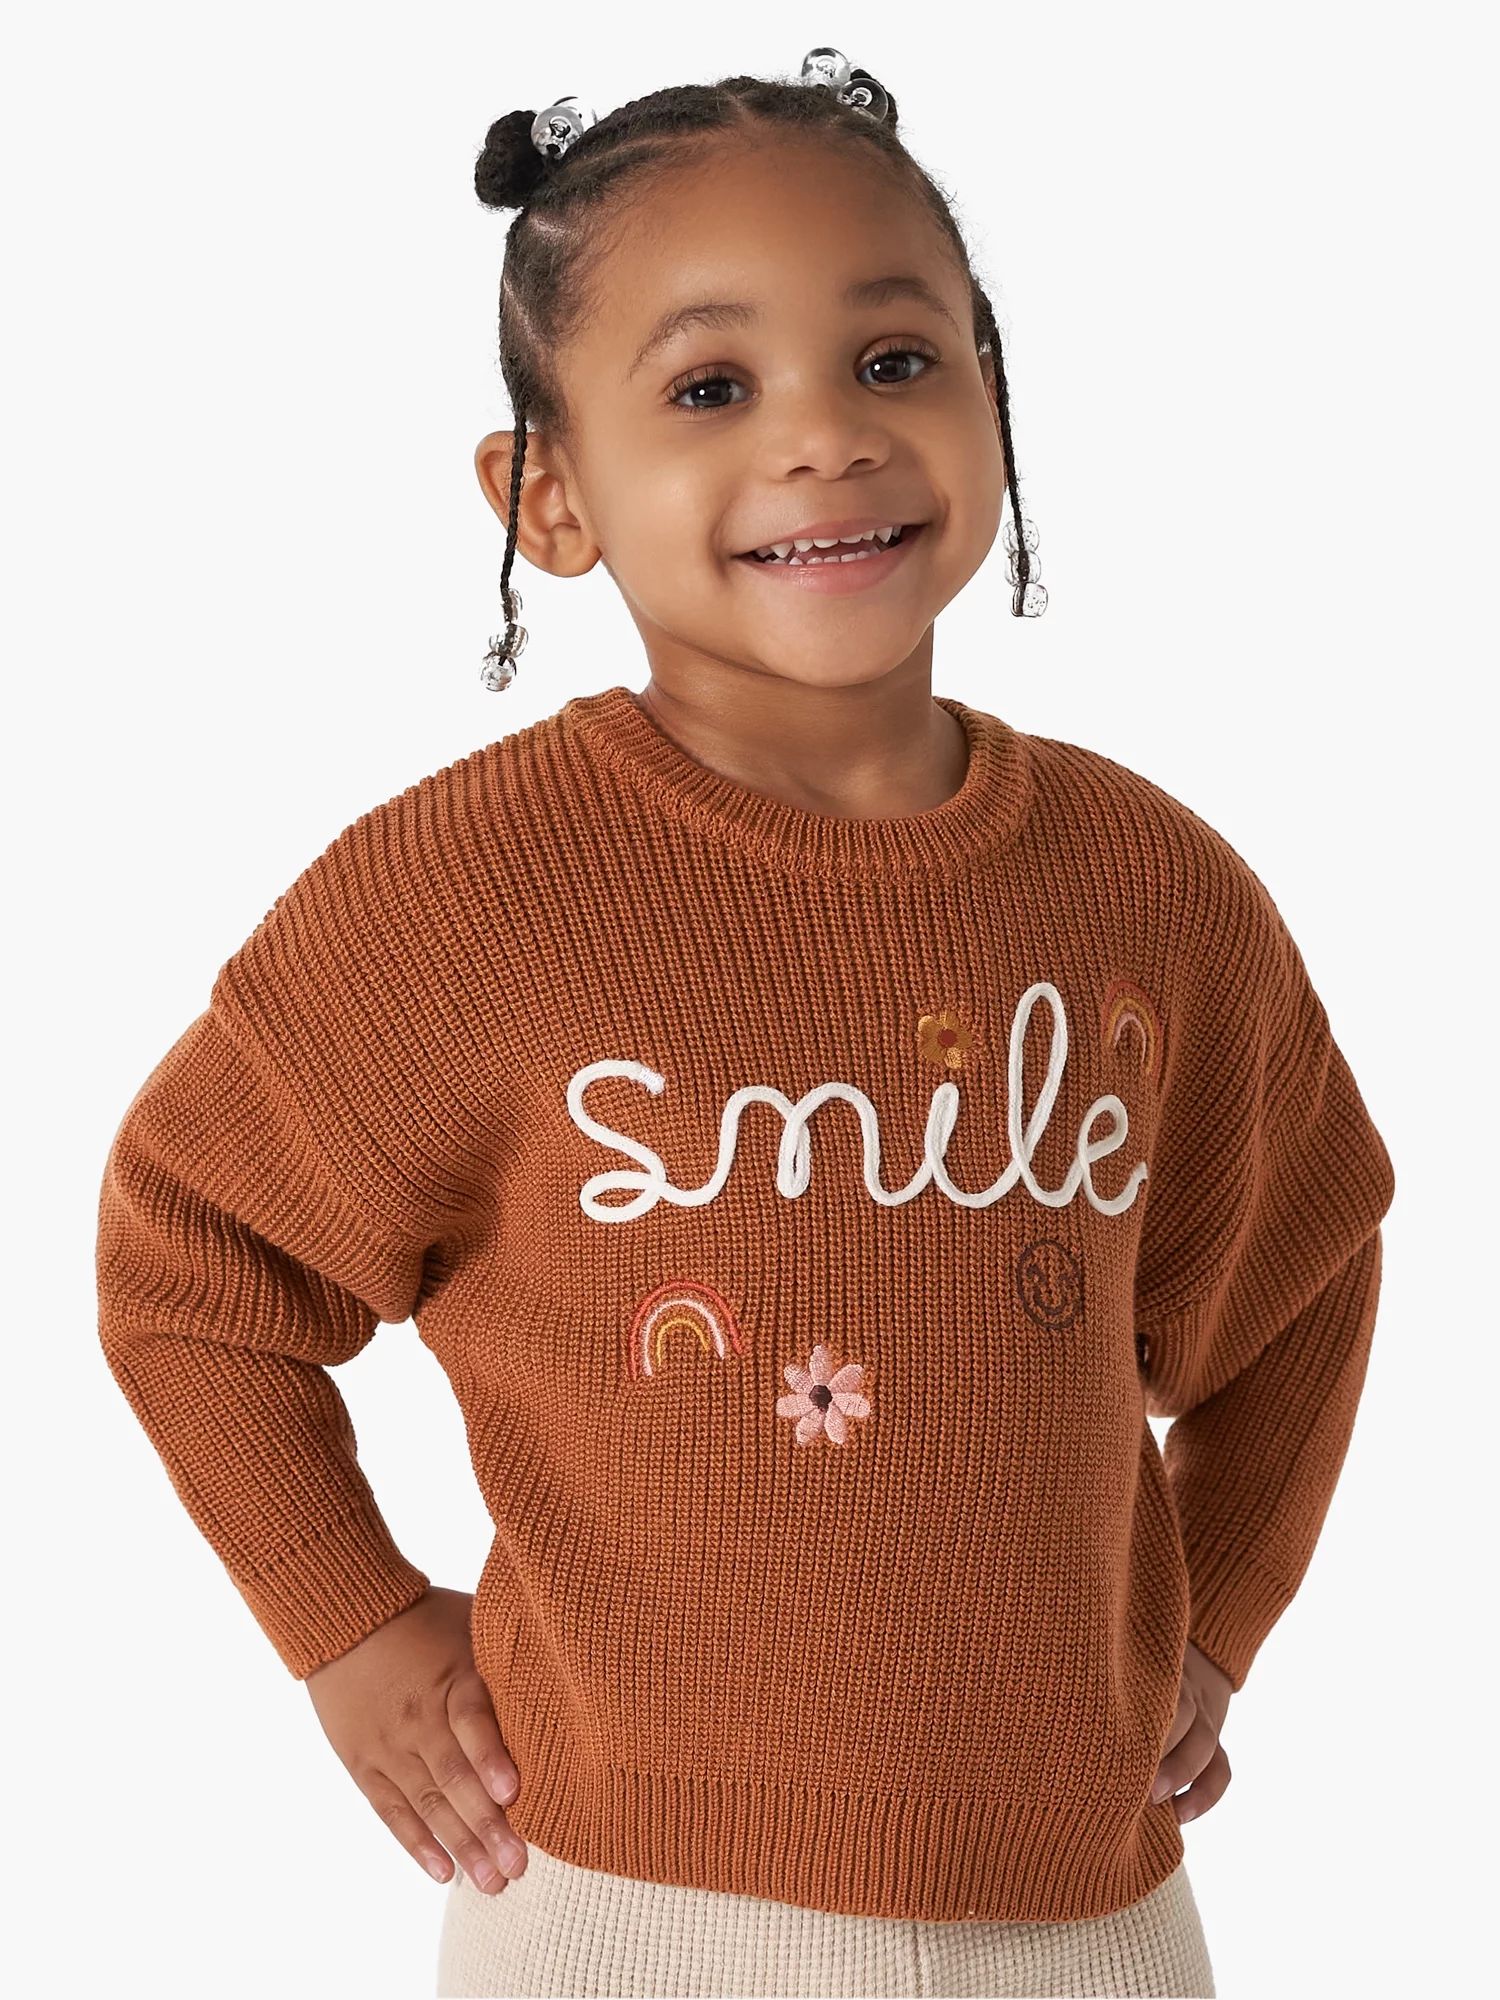 Modern Moments by Gerber Toddler Girl Matching Sister Sweater, Sizes 2T-5T | Walmart (US)